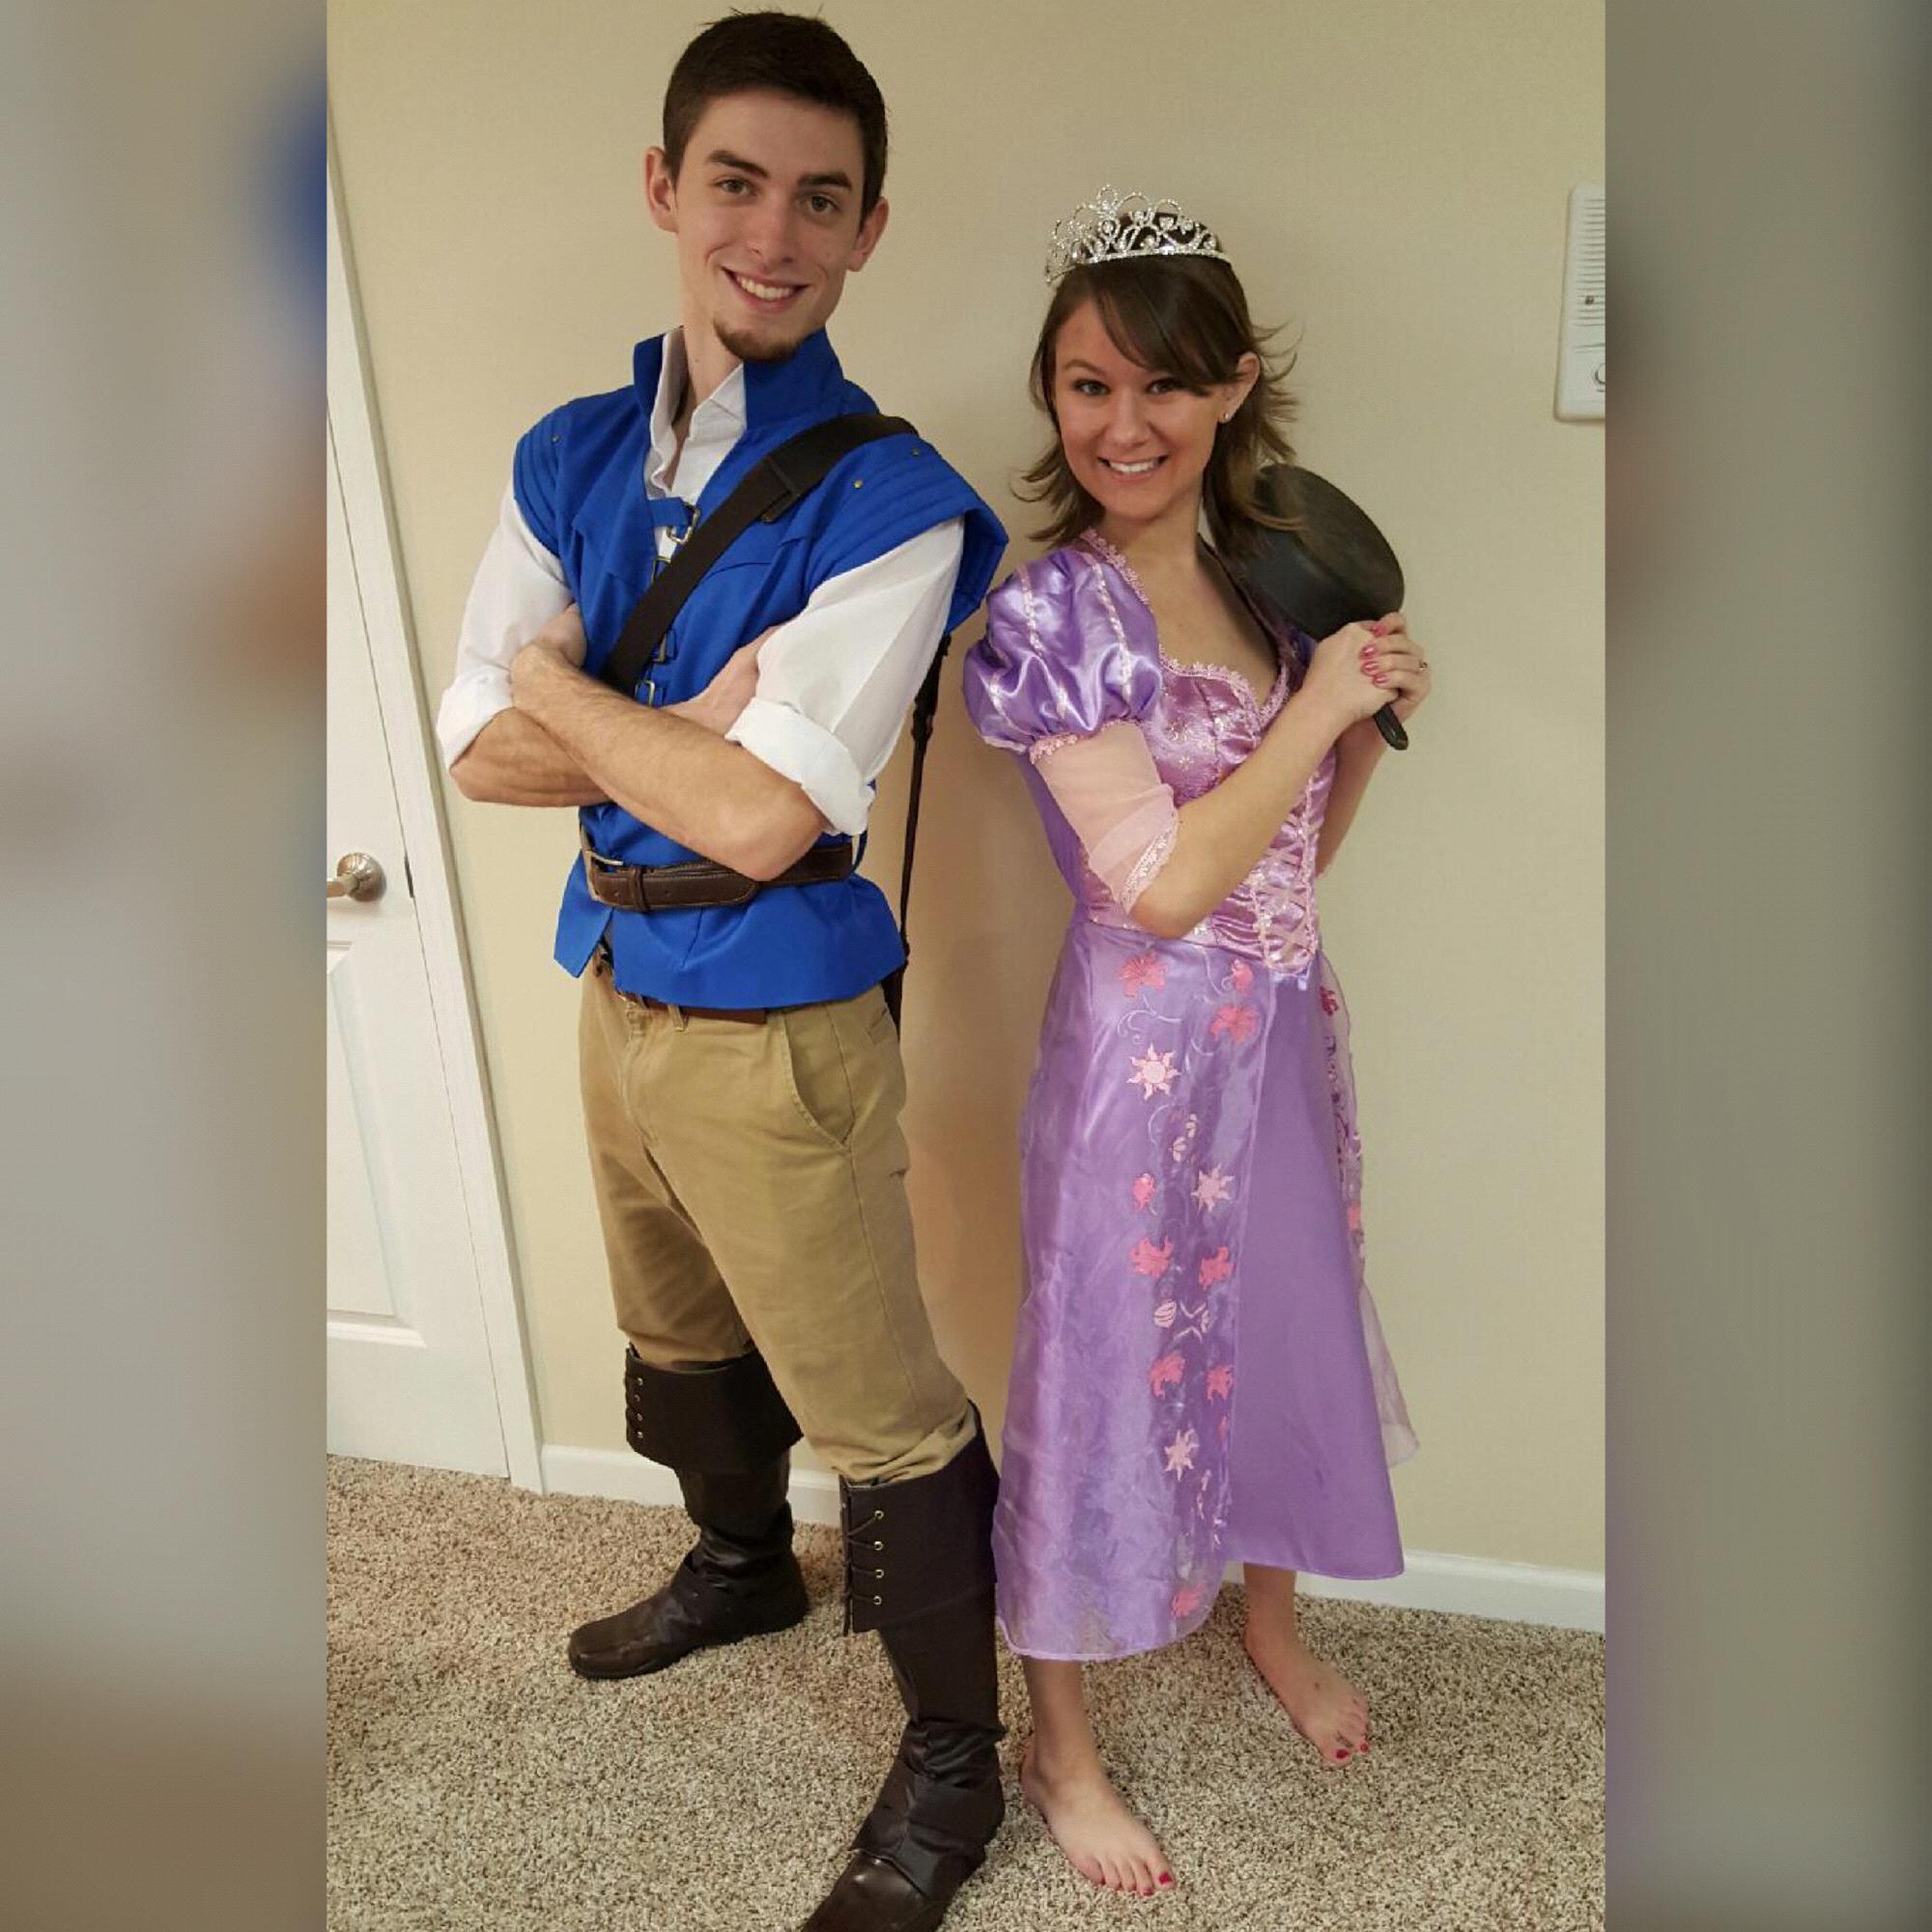 February 6th, 2016 - Dressed up as our favorite Tangled characters, Flynn Rider and Rapunzel, for Disney On Ice!